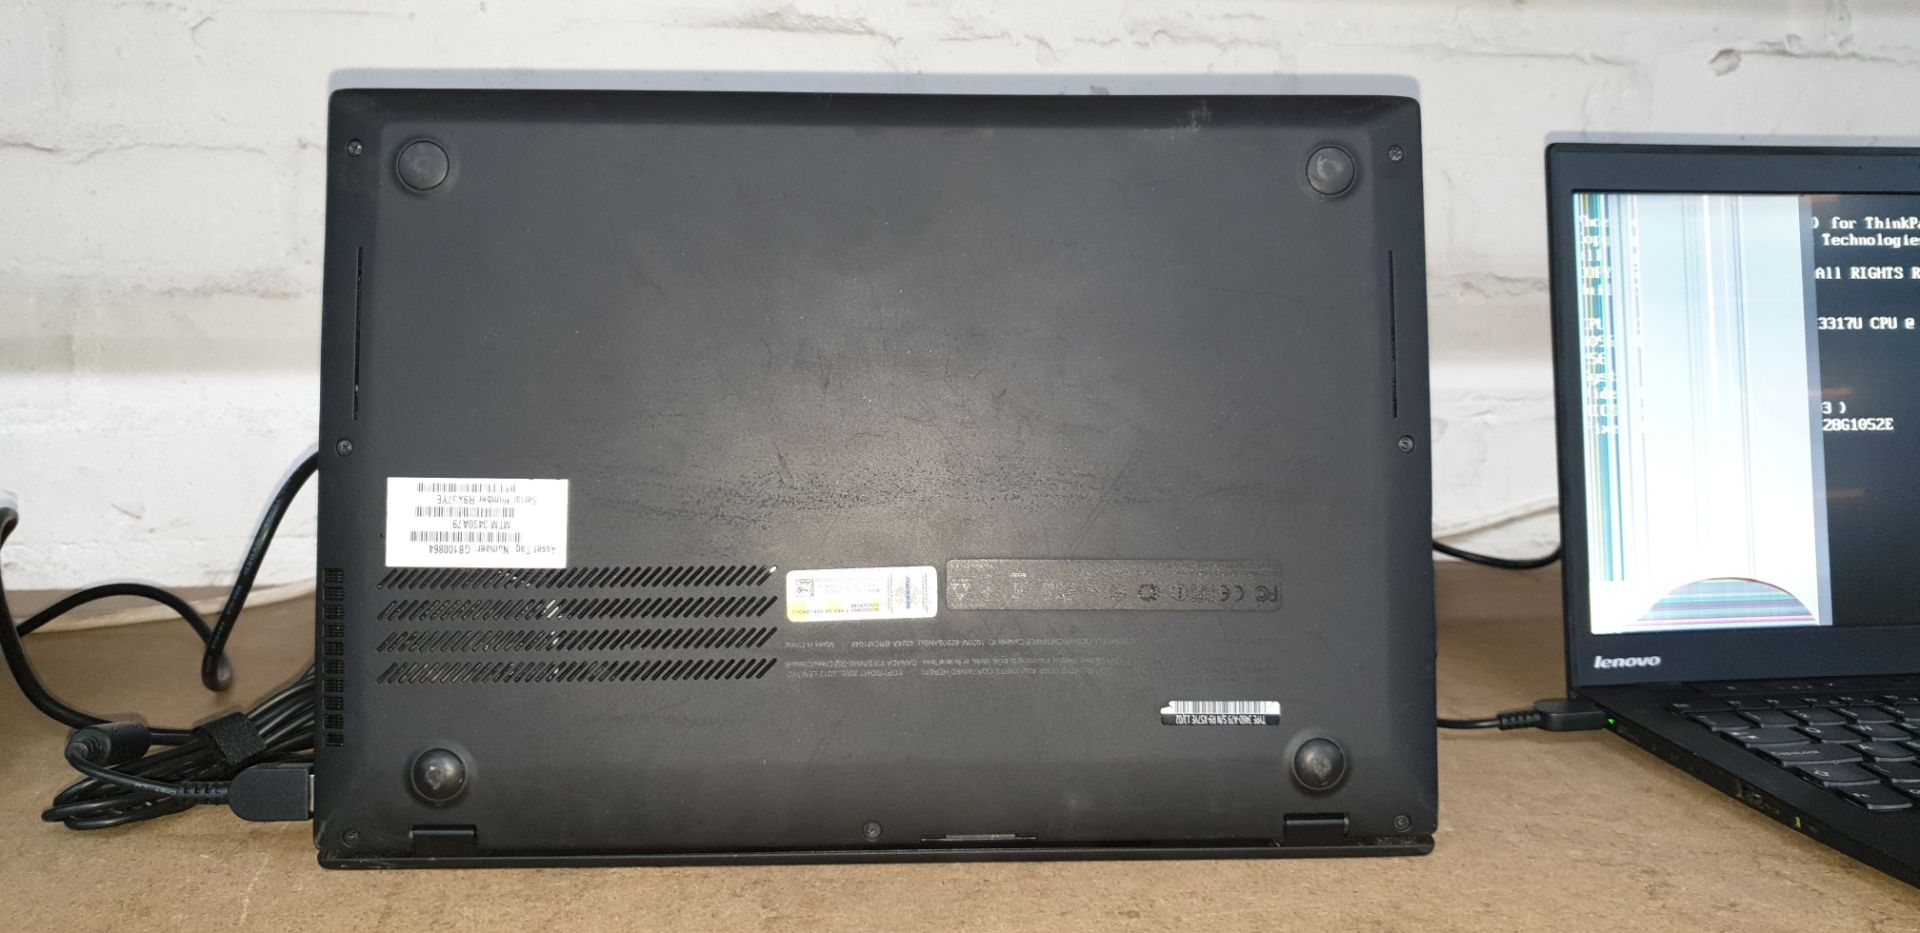 Lenovo notebook Thinkpad X1 Carbon I5-4300, 4Gb, 128Gb SSD, 13.3" Includes charger - Image 4 of 9